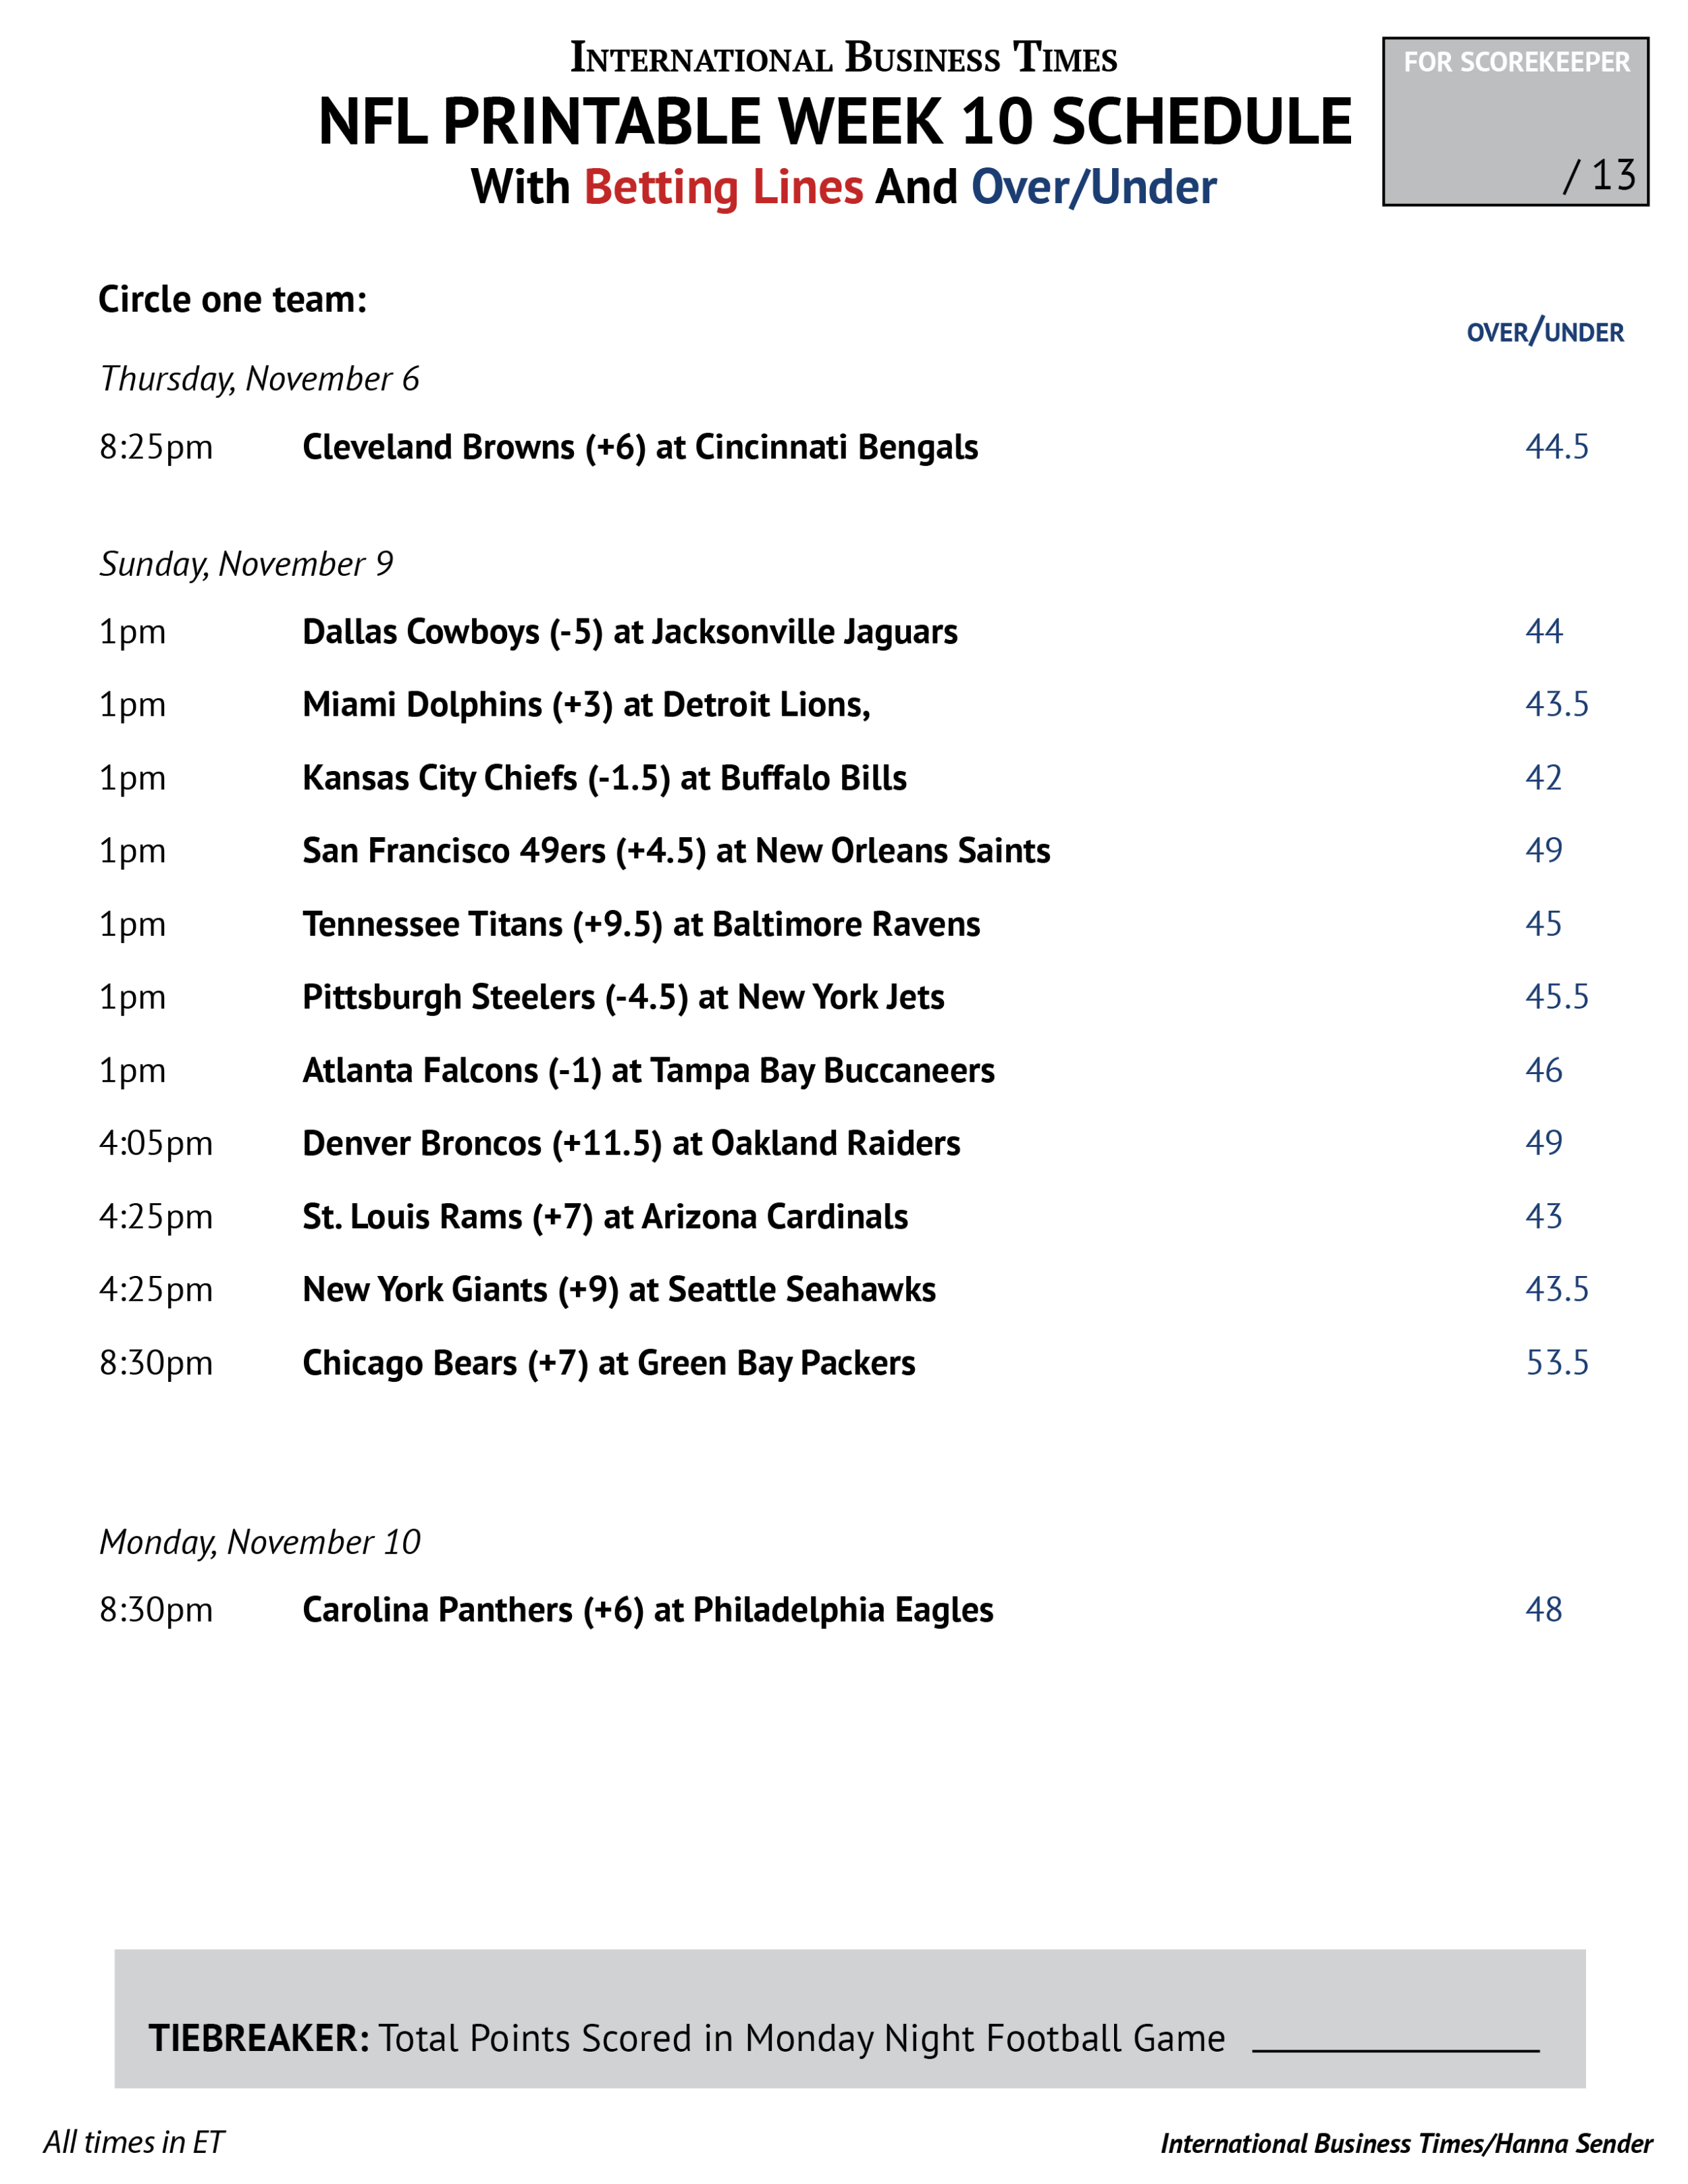 NFL Office Pool 2014: Printable Week 10 Schedule With Betting Lines And